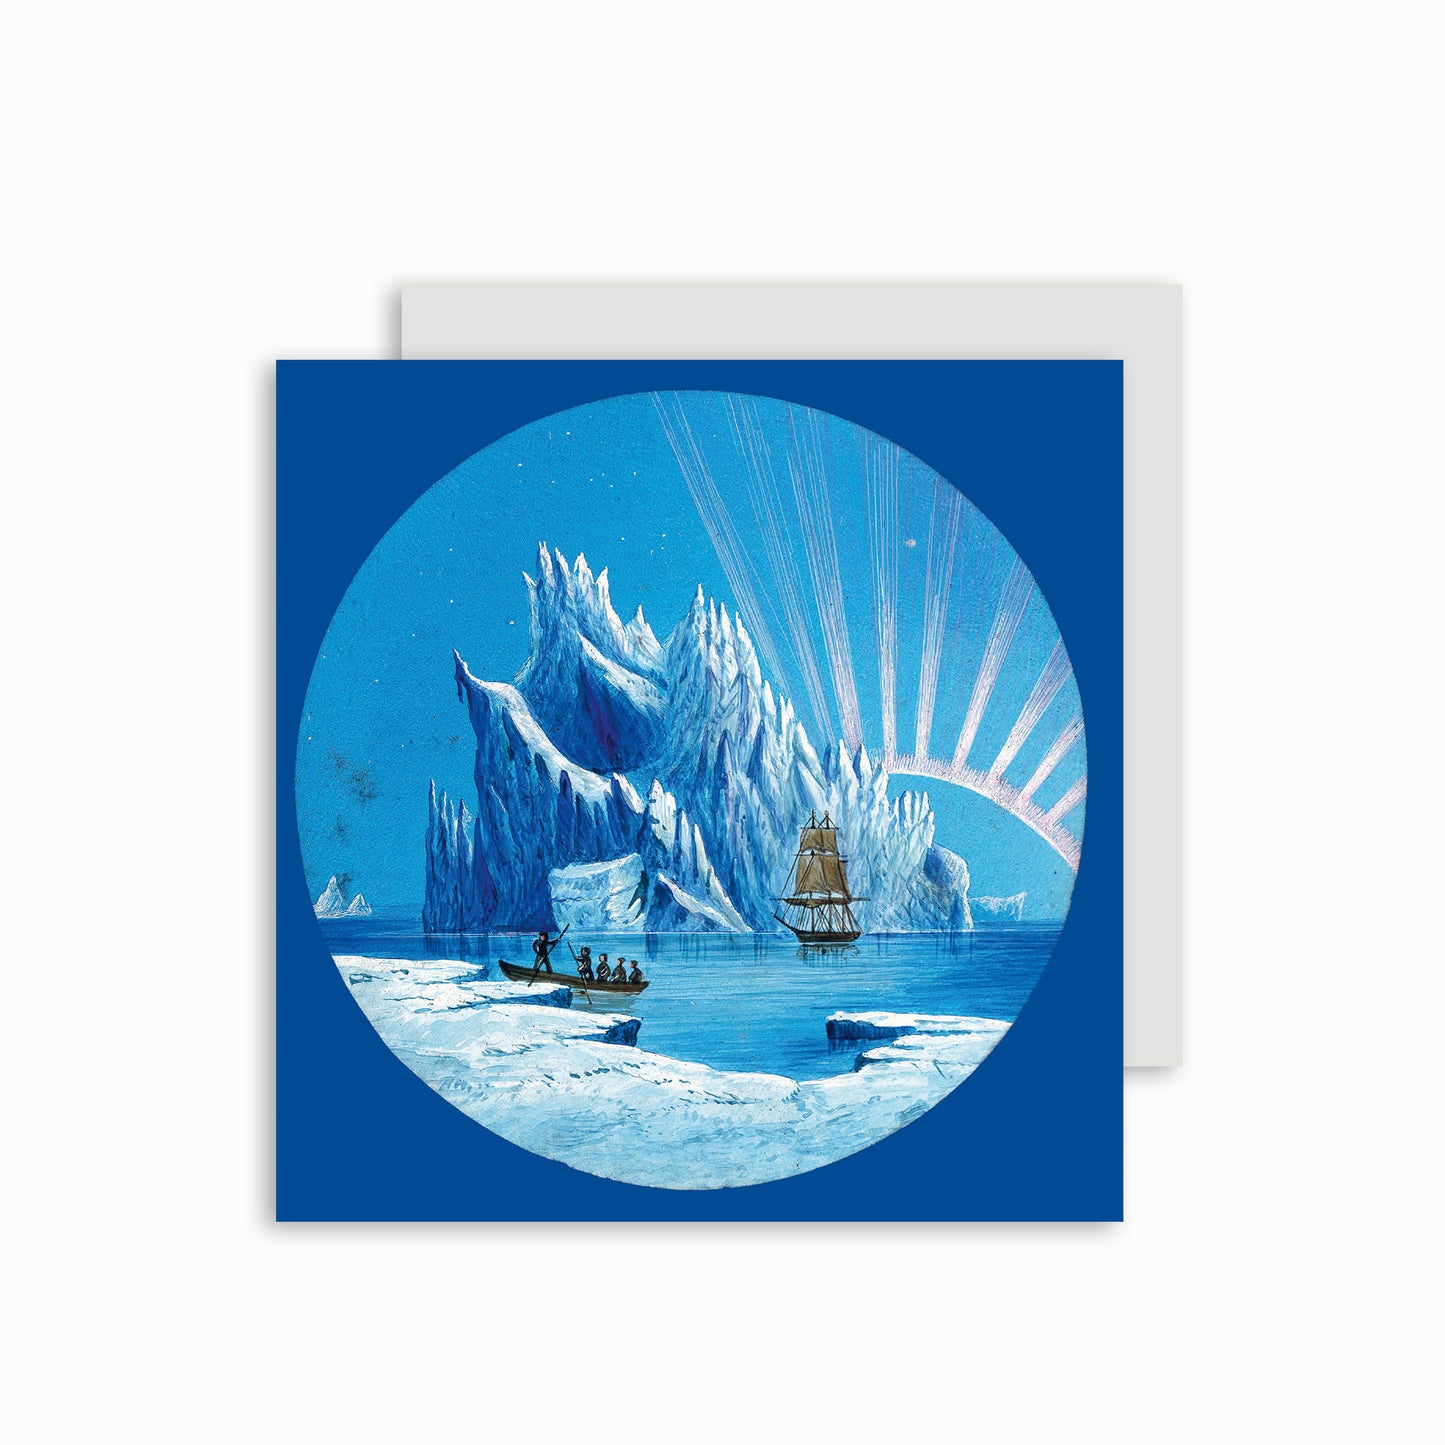 Christmas card featuring image of Icebergs and and the Aurora by E. A. Wilson.